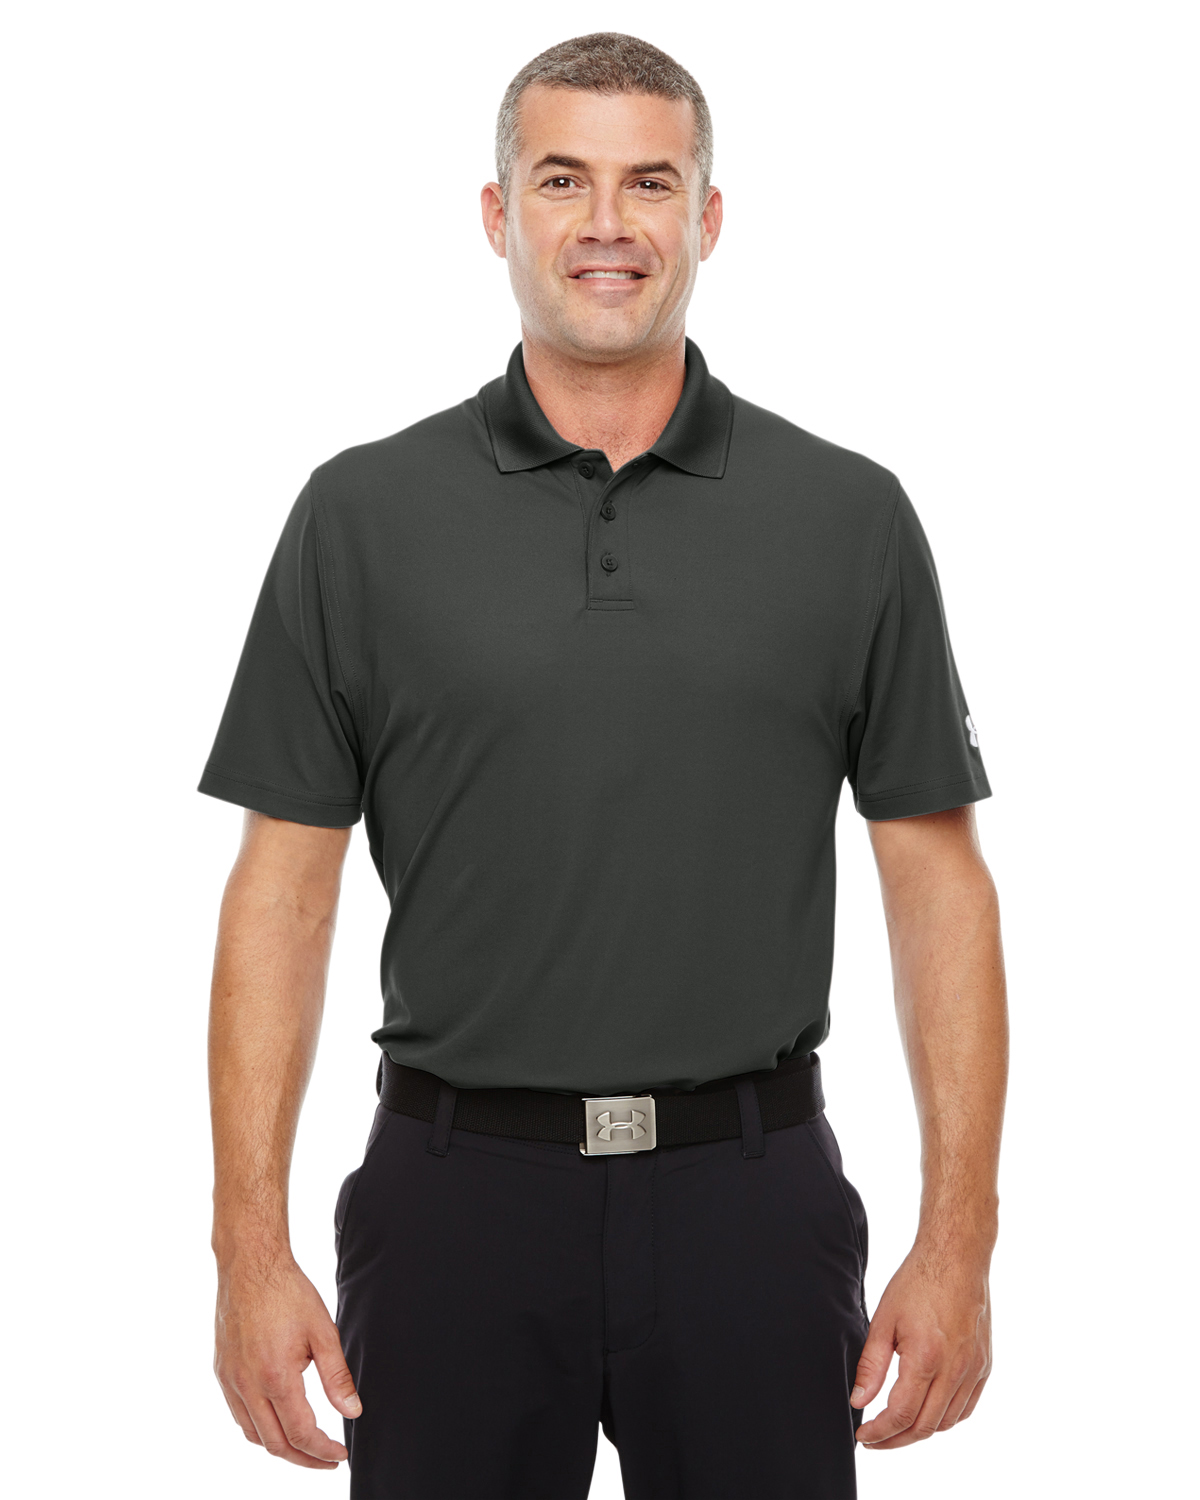 Under Armour 1261172 - Men's Corp Performance Polo